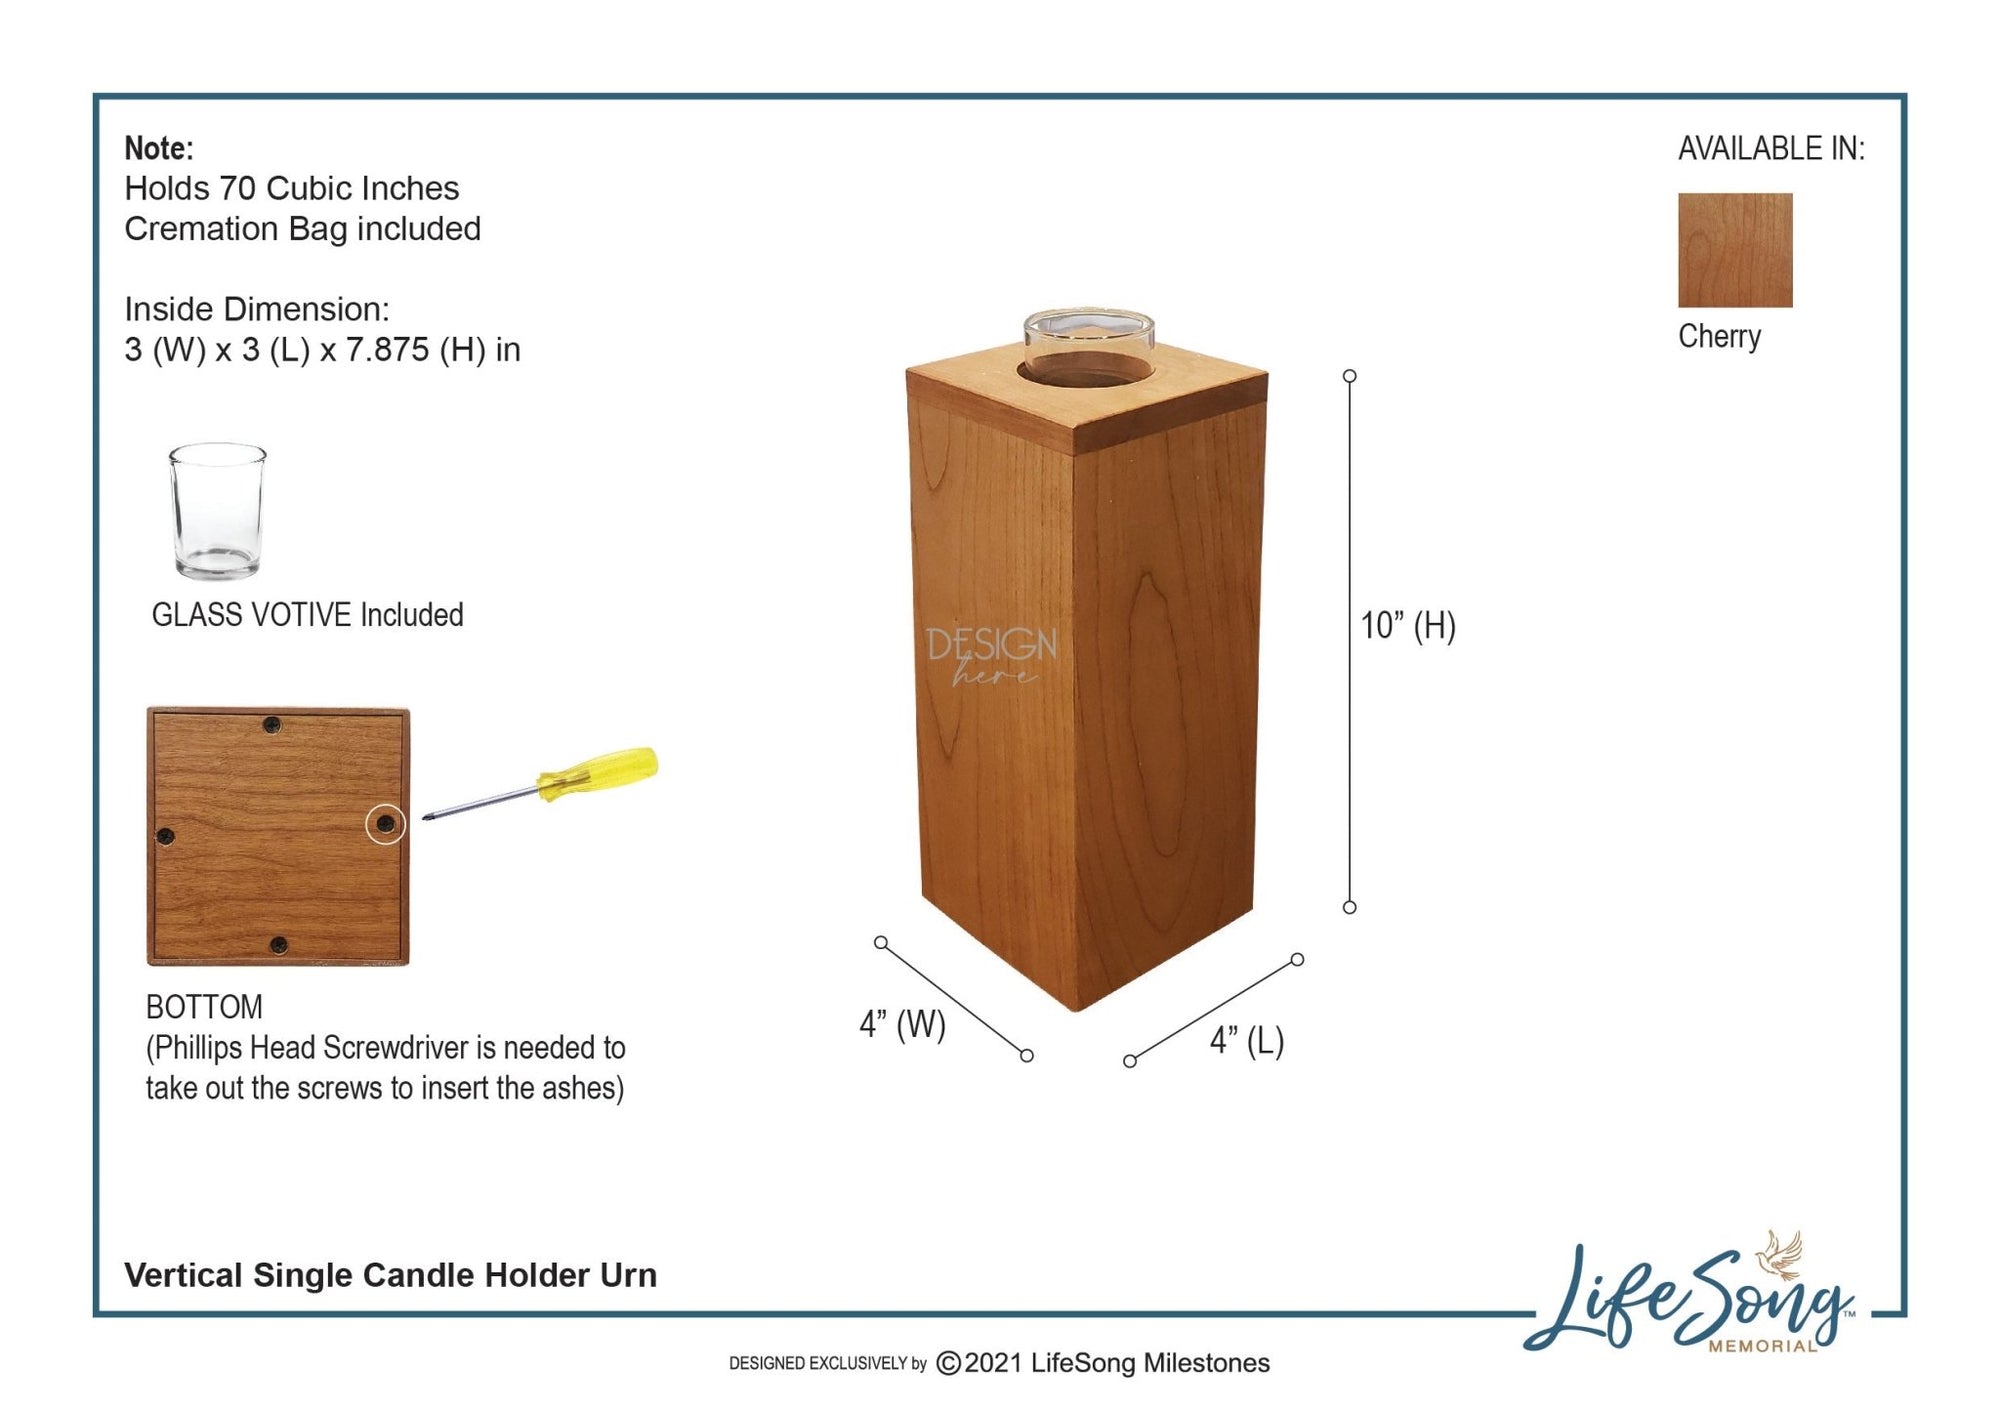 Custom Wooden Candle Holder Cremation Urn Box for Human Ashes Single Votive Holds 70 Cu Inches – A Limb Has Fallen - LifeSong Milestones